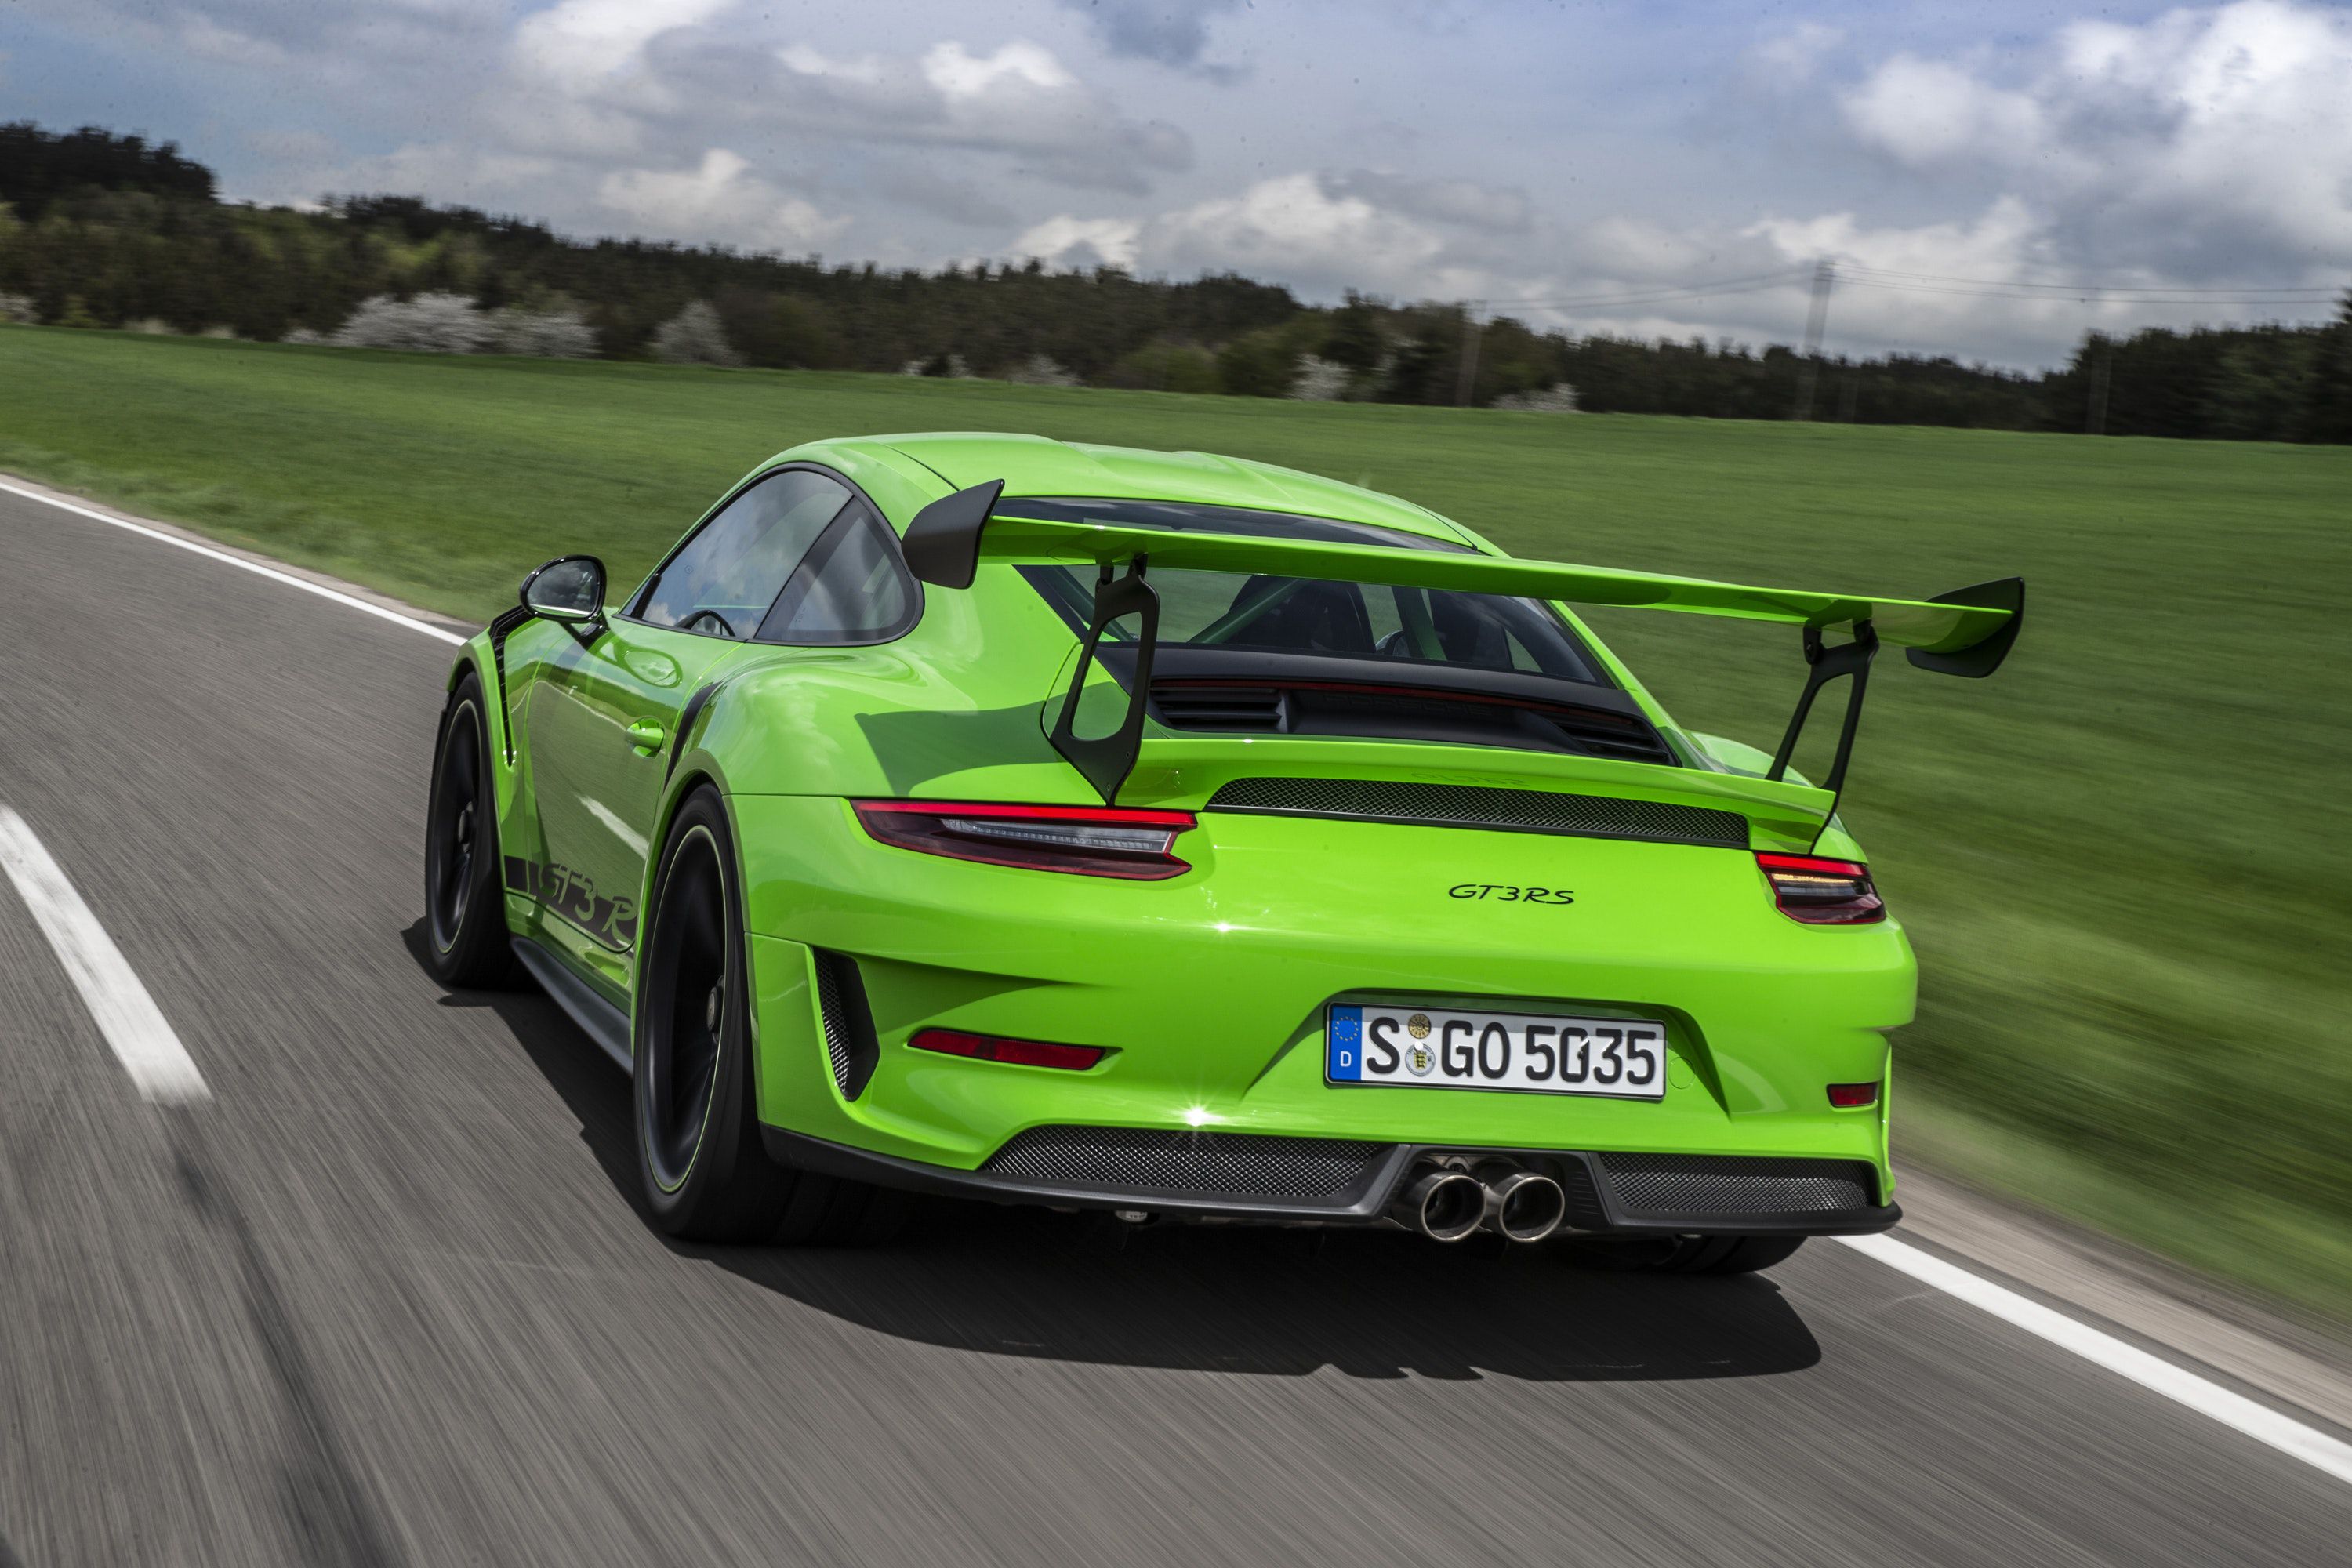 rear view of green porsche driving on a road